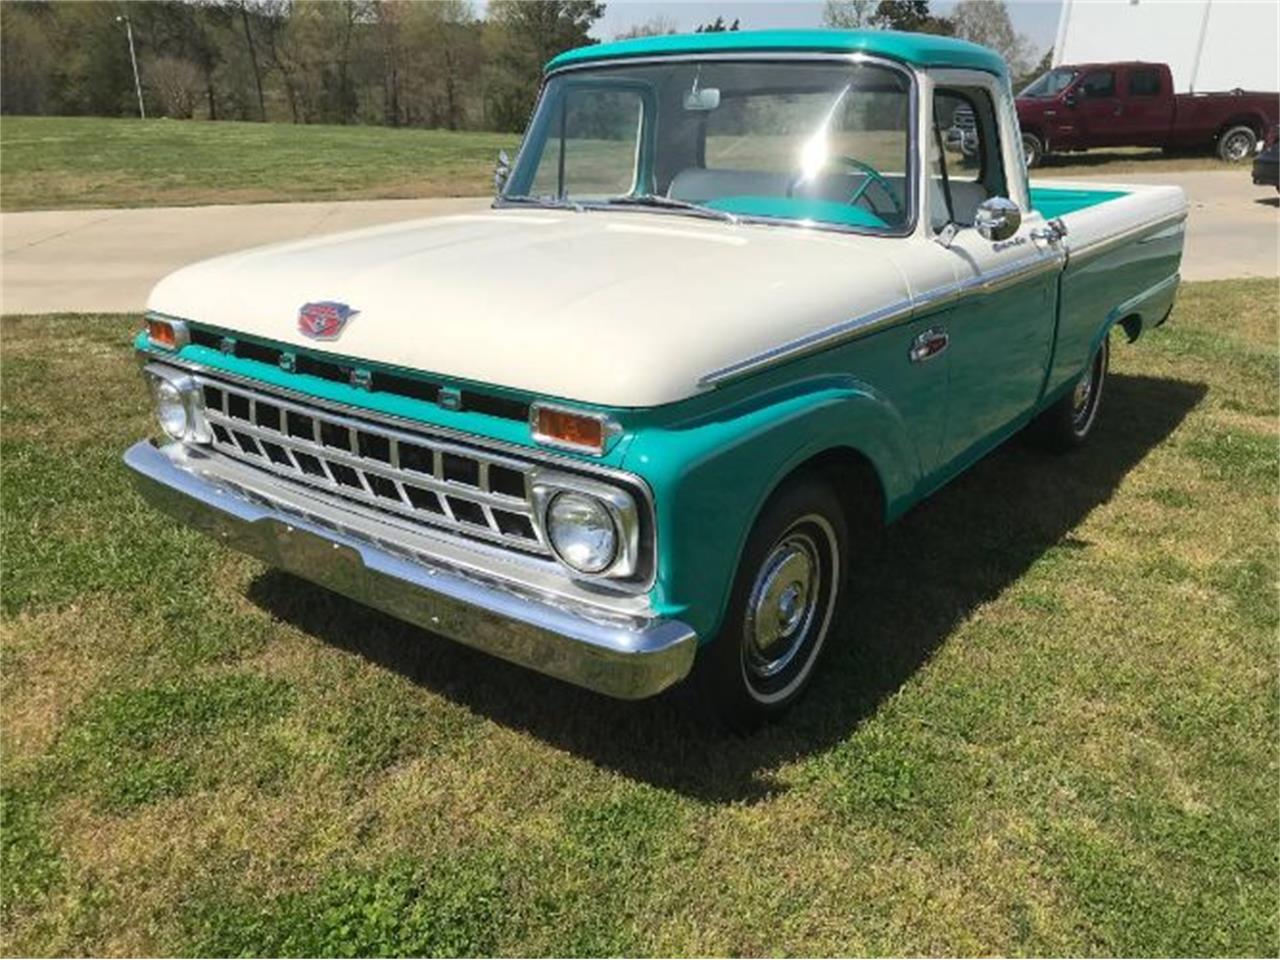 1965 Ford Pickup for Sale | ClassicCars.com | CC-1208648